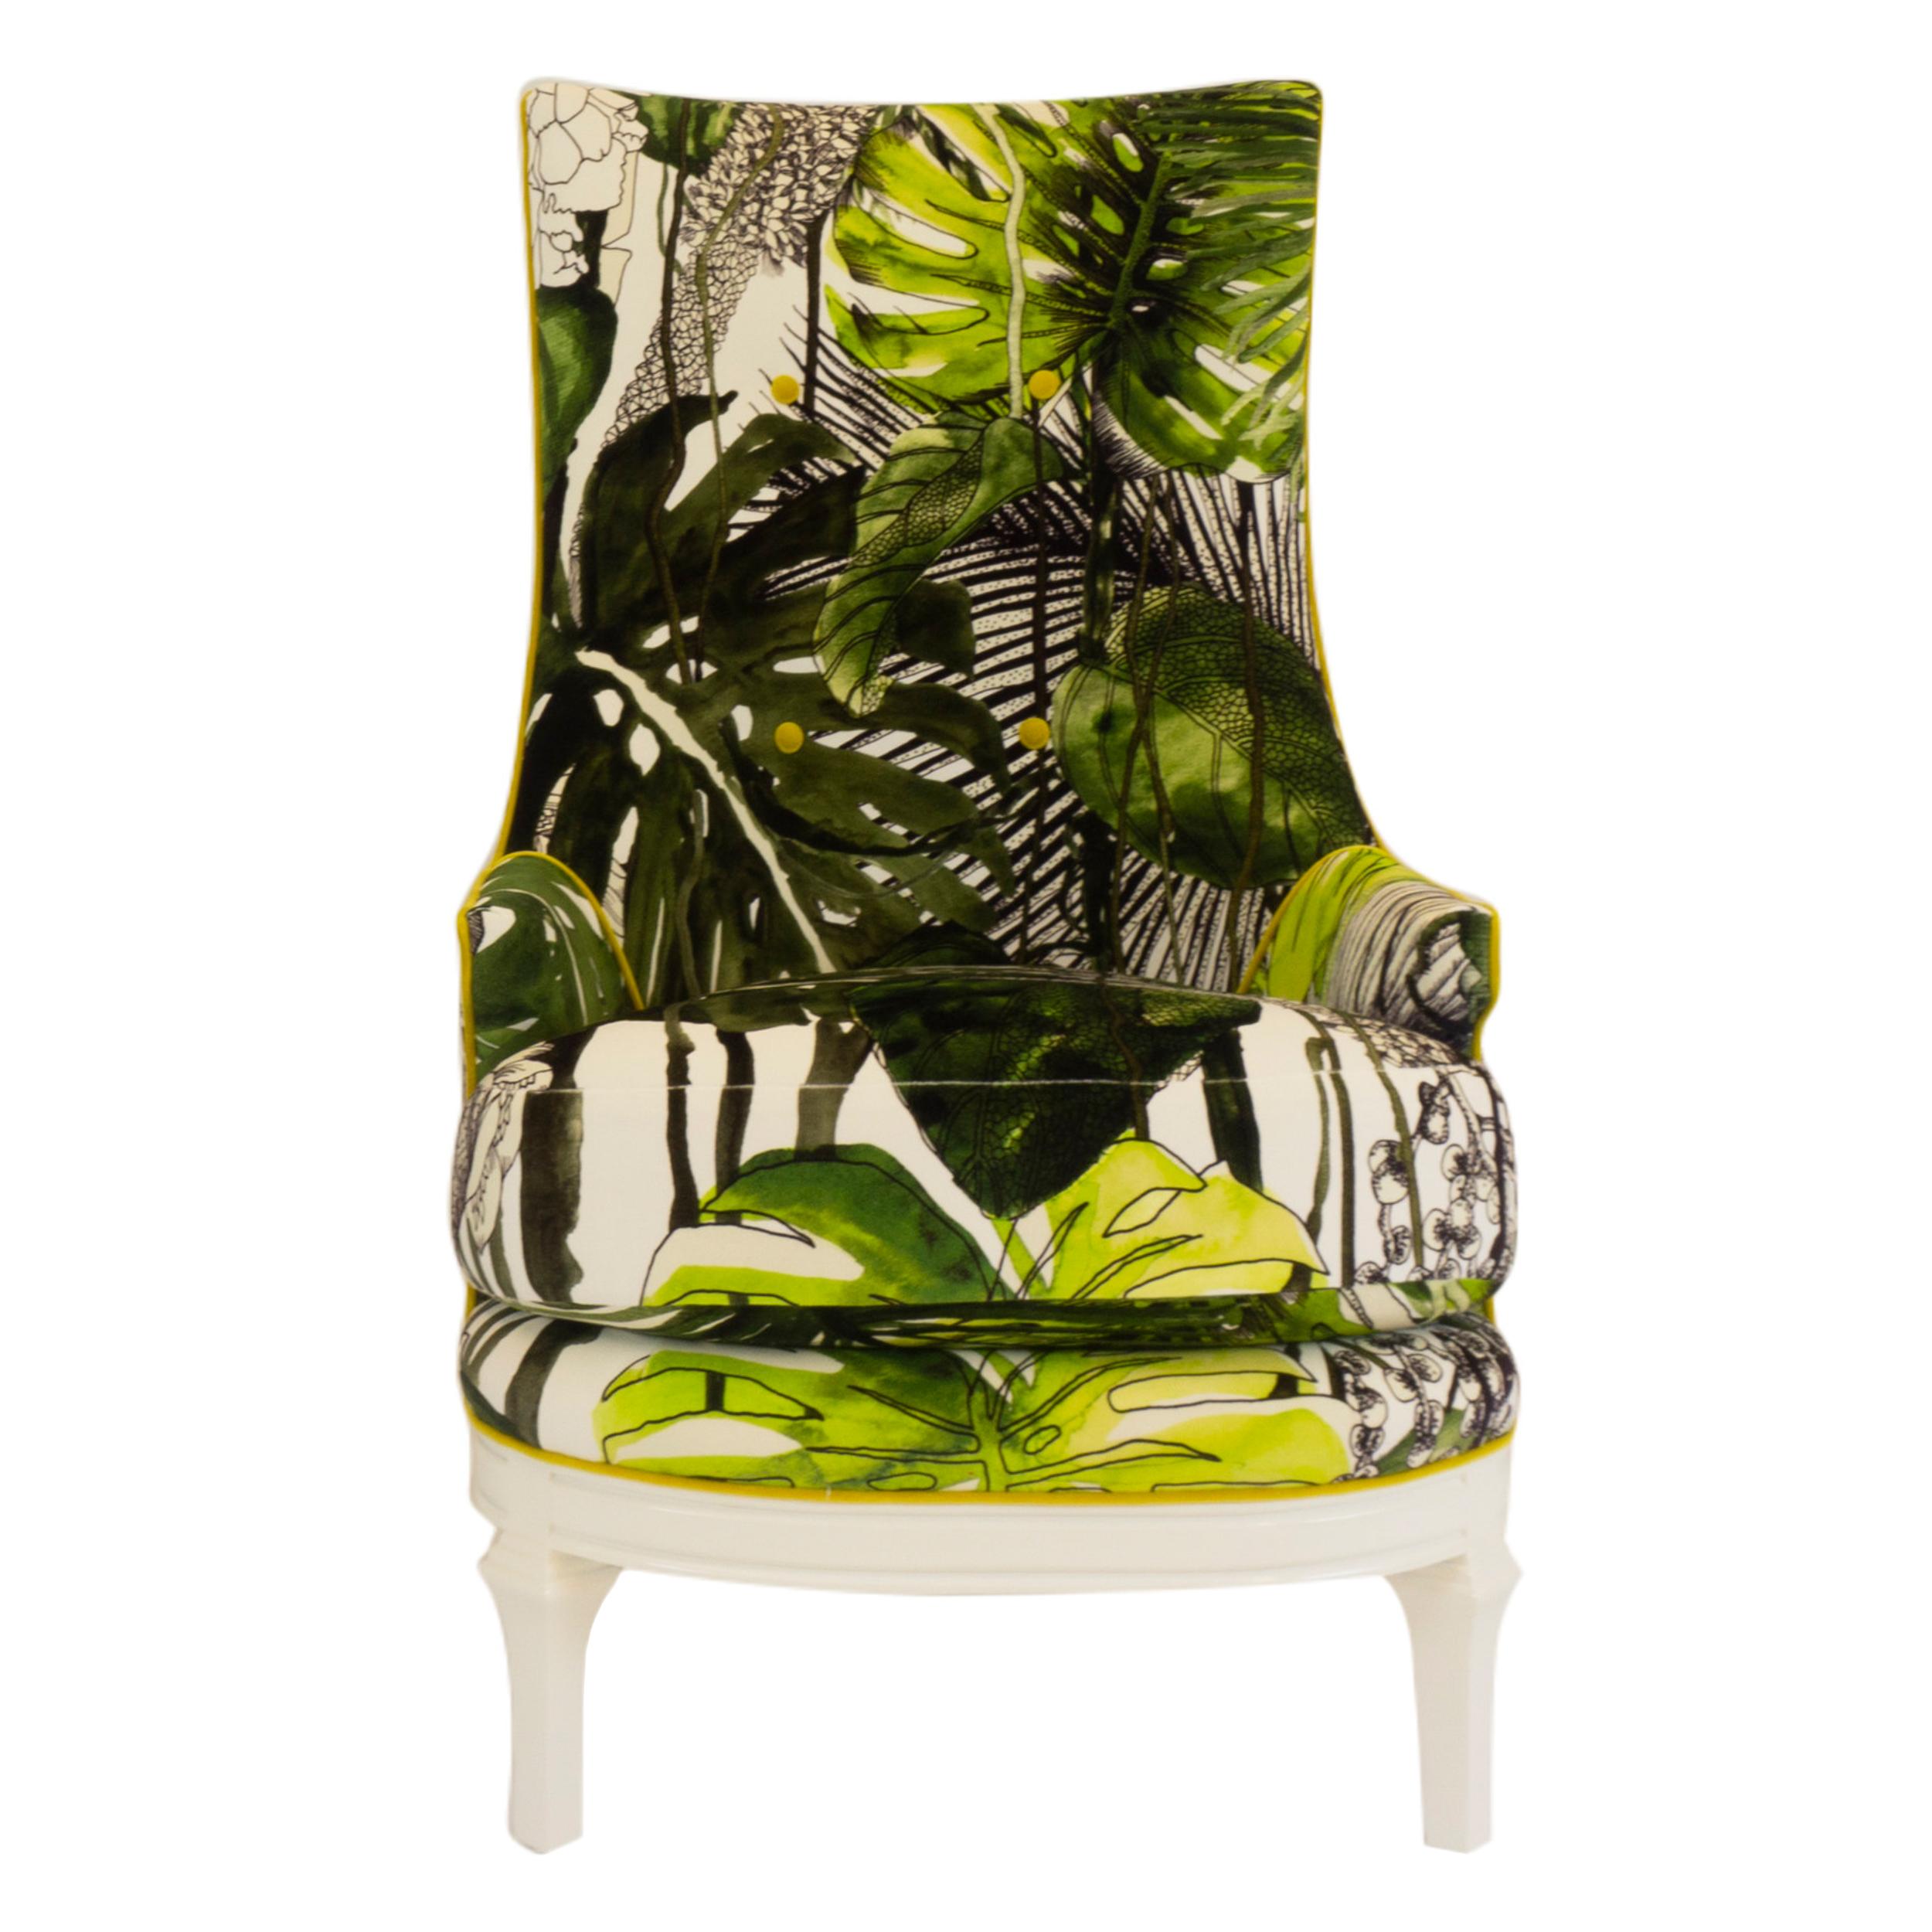 New vintage-Inspired high back upholstered accent chair with rounded base, deep feather-filled seat and tapered legs. The chair is shown in a Christian Lacroix vibrant velvet palm foliage print. Small accent buttons and welting in yellow velvet